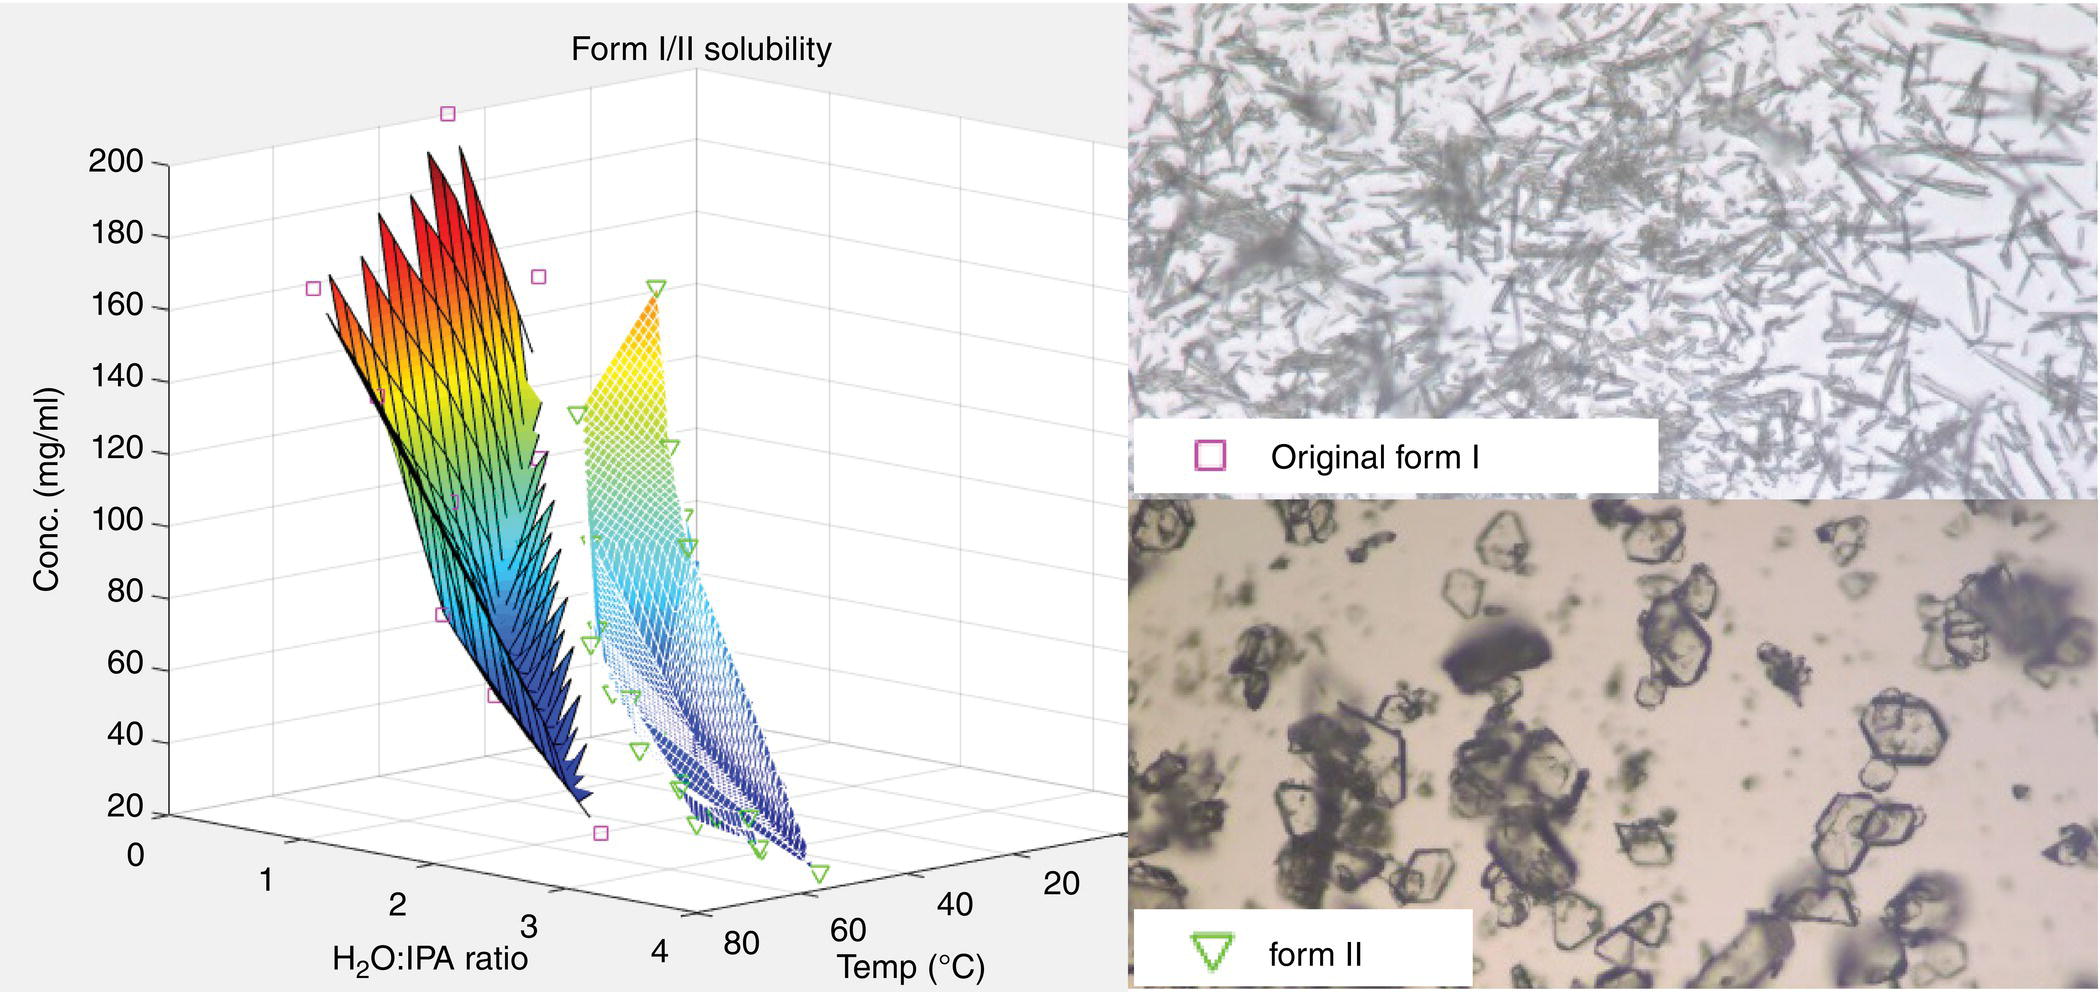 Left: 3D graph displaying solubility plots with unfilled square and inverted triangle markers. Right: three micrographs labeled original form I (unfilled square) and form II (unfilled inverted triangle).